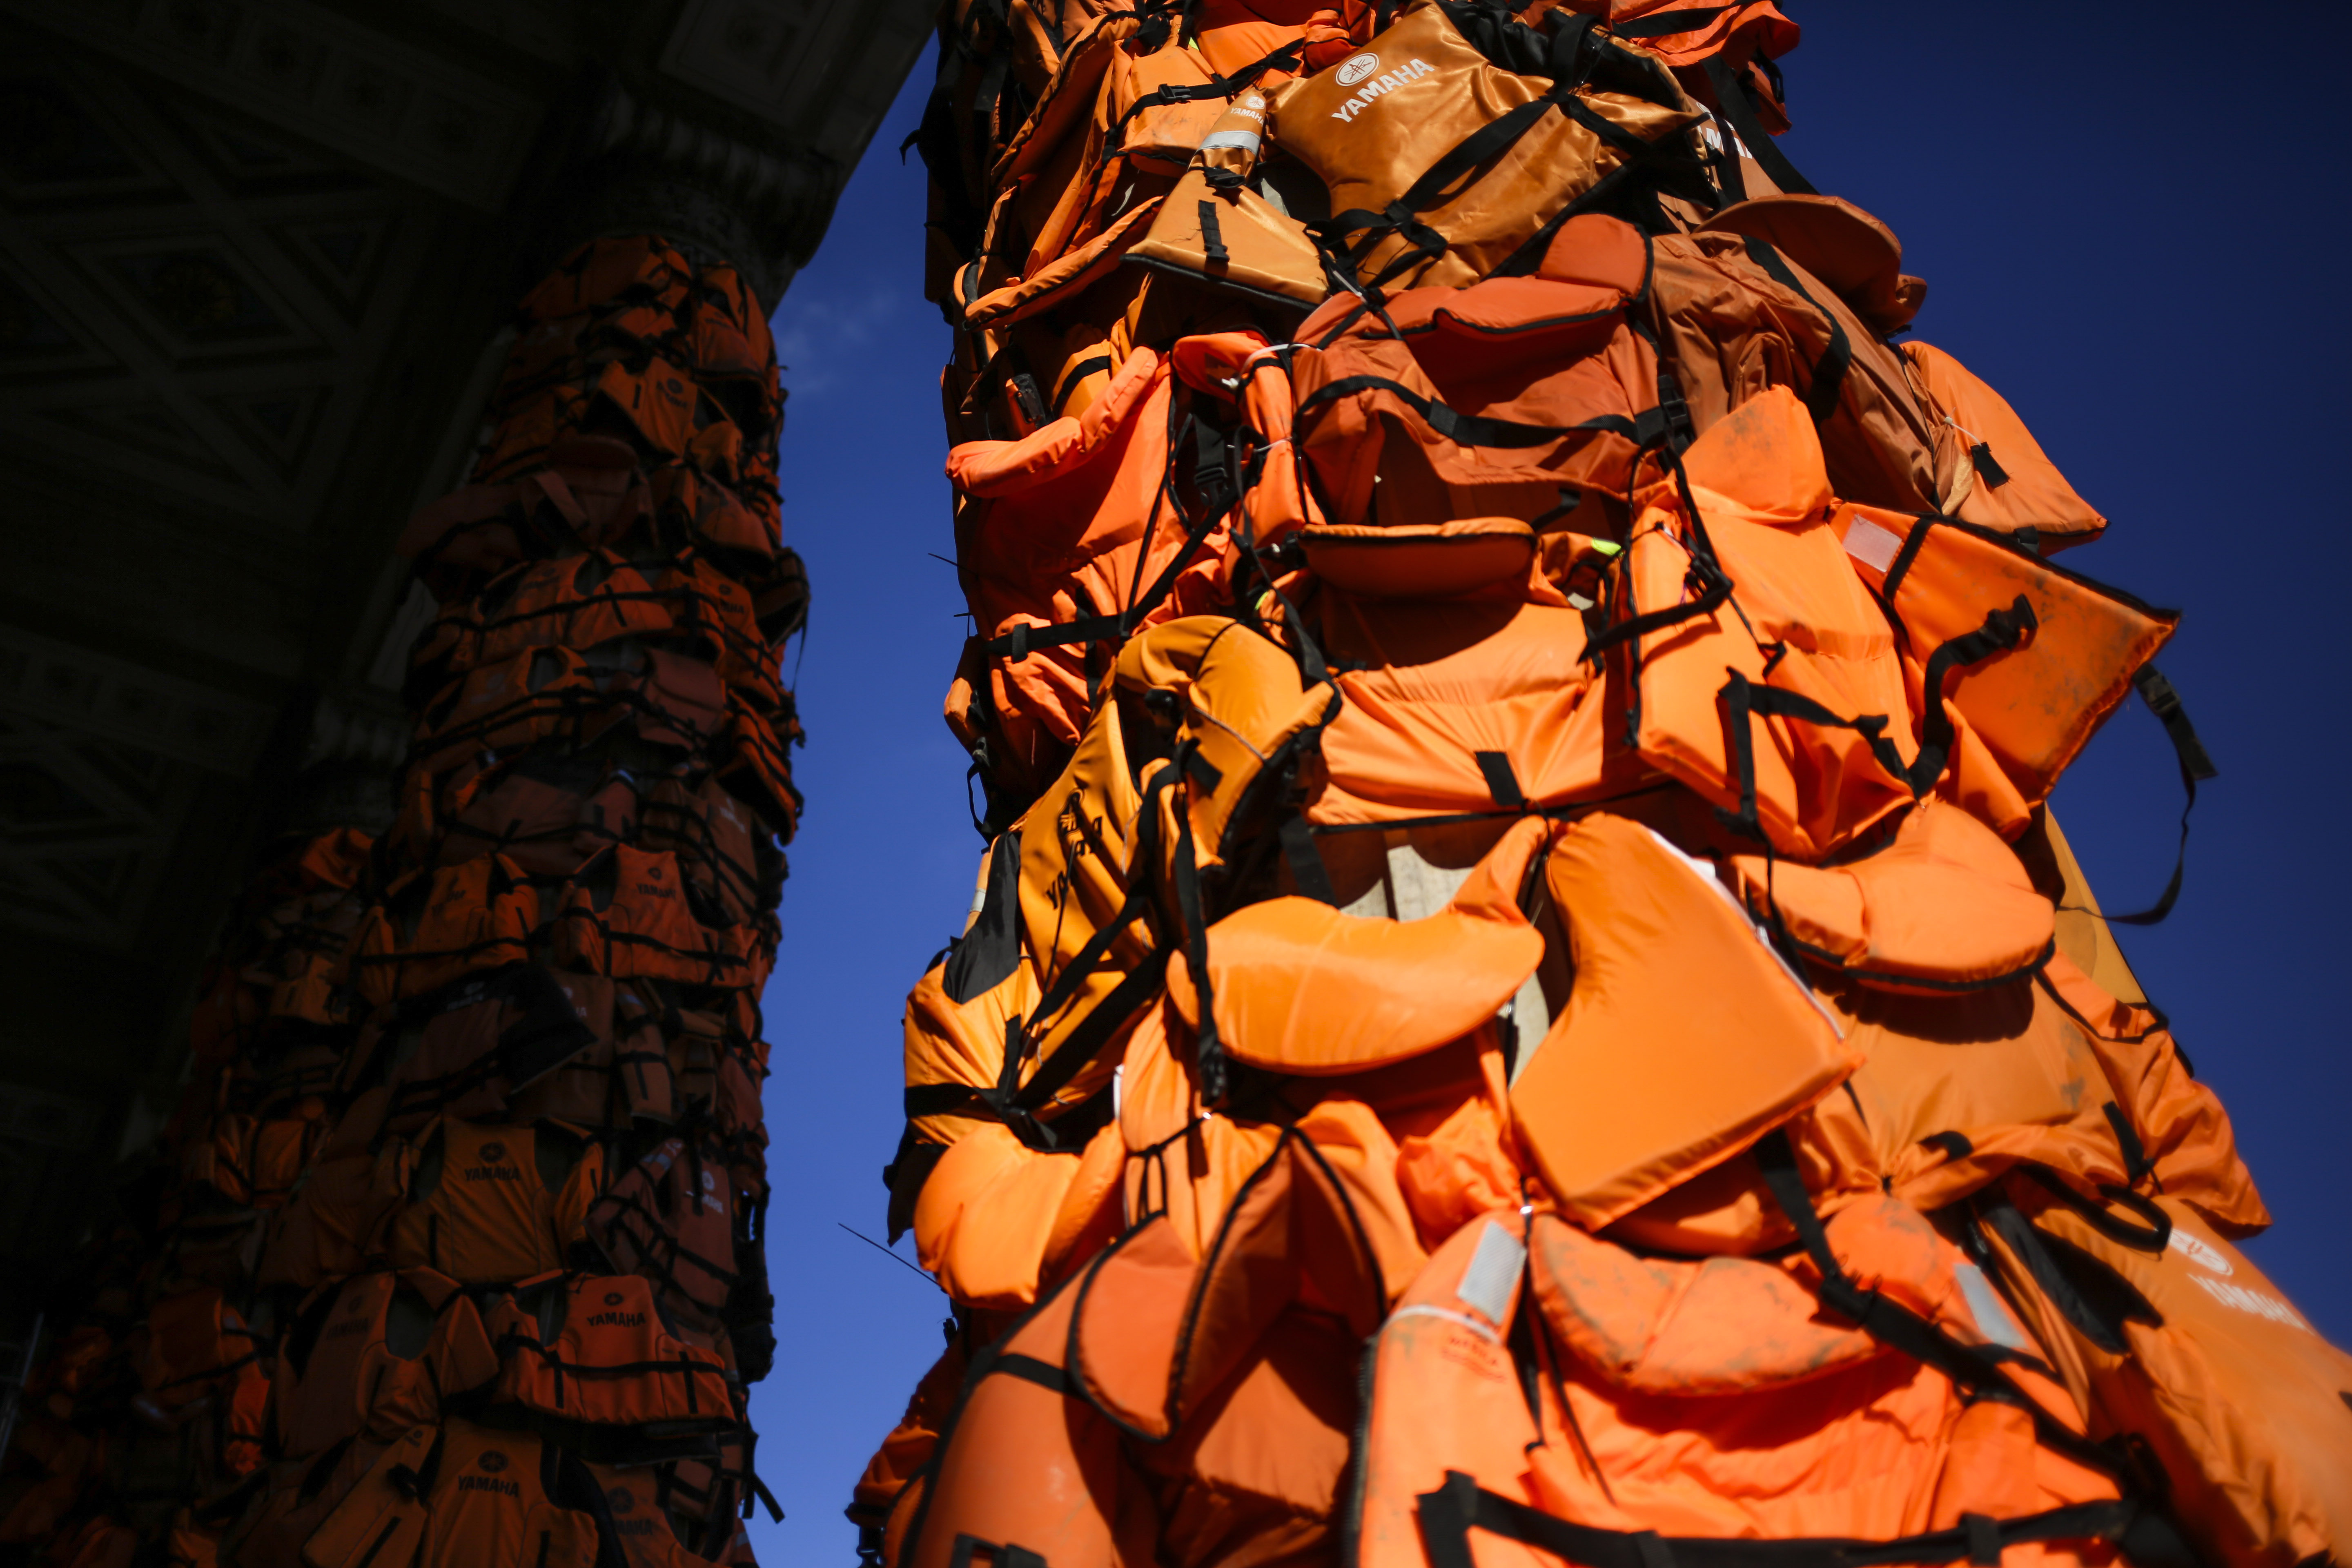 Происшествия: A art installation by Chinese artist Ai Weiwei with life vests used by refugees and collected on the Greek island of Lesbos is set up at the Konzerthaus Berlin (Concert Hall Berlin) for the Cinema For Peace gala alongside the 2016 Berlinale Film Festival in Berlin, Saturday, Feb. 13, 2016. The charity gala will take place at the Konzerthaus on Monday, Feb. 15, 2016. (AP Photo/Markus Schreiber)